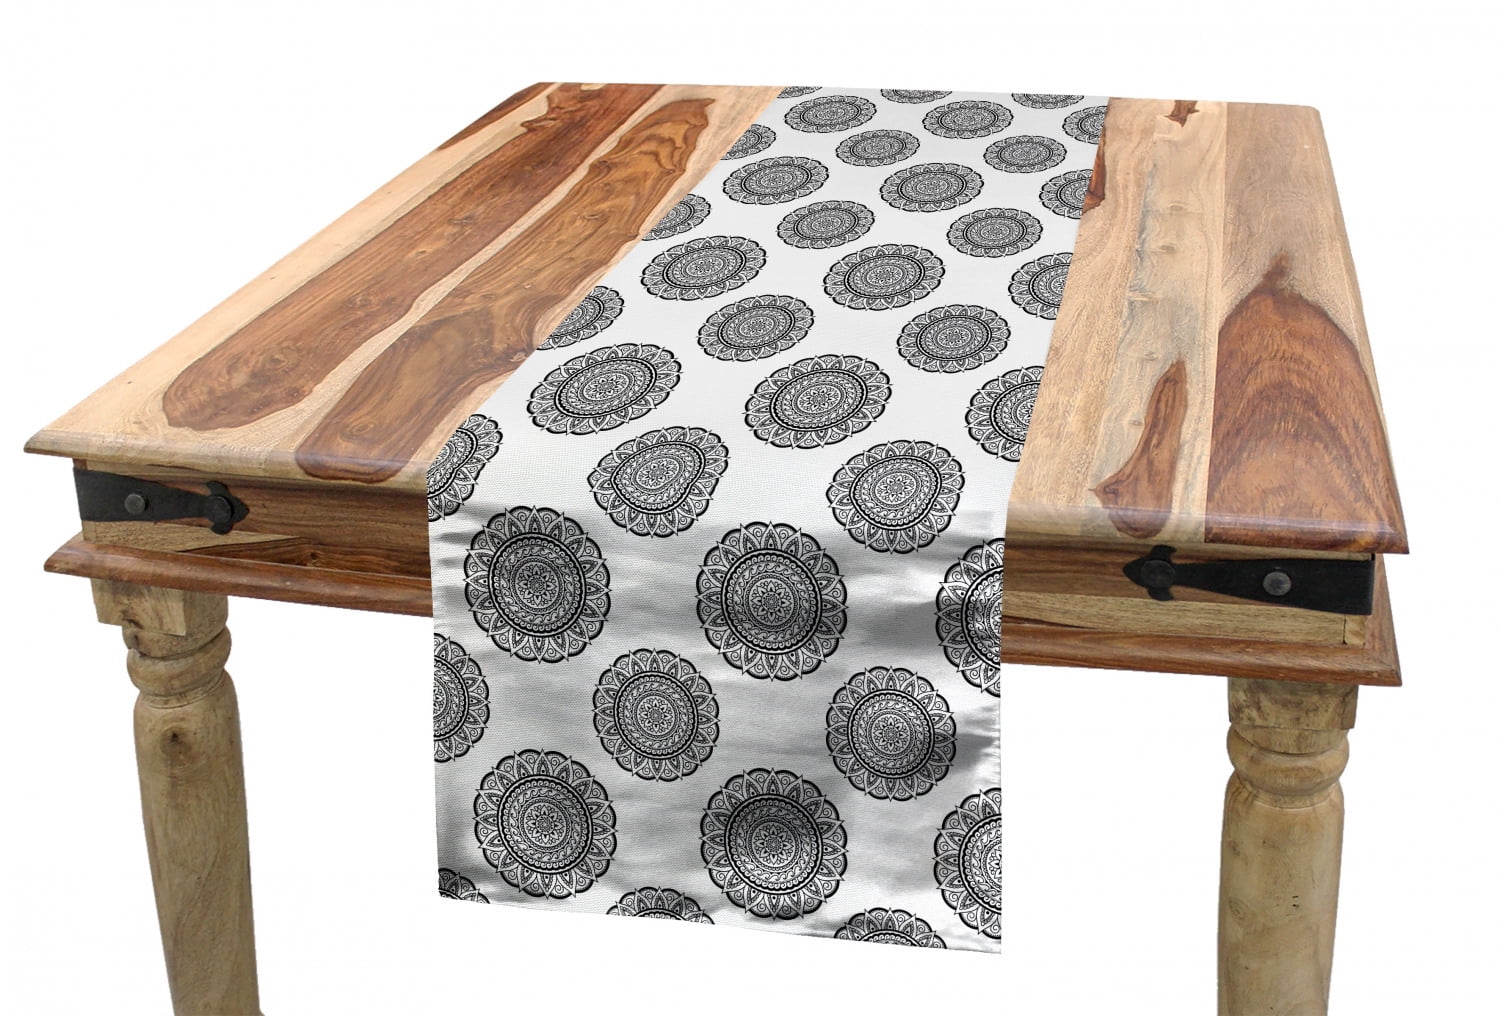 Mandala Table Runner, Traditional Round Details on a Plain Background